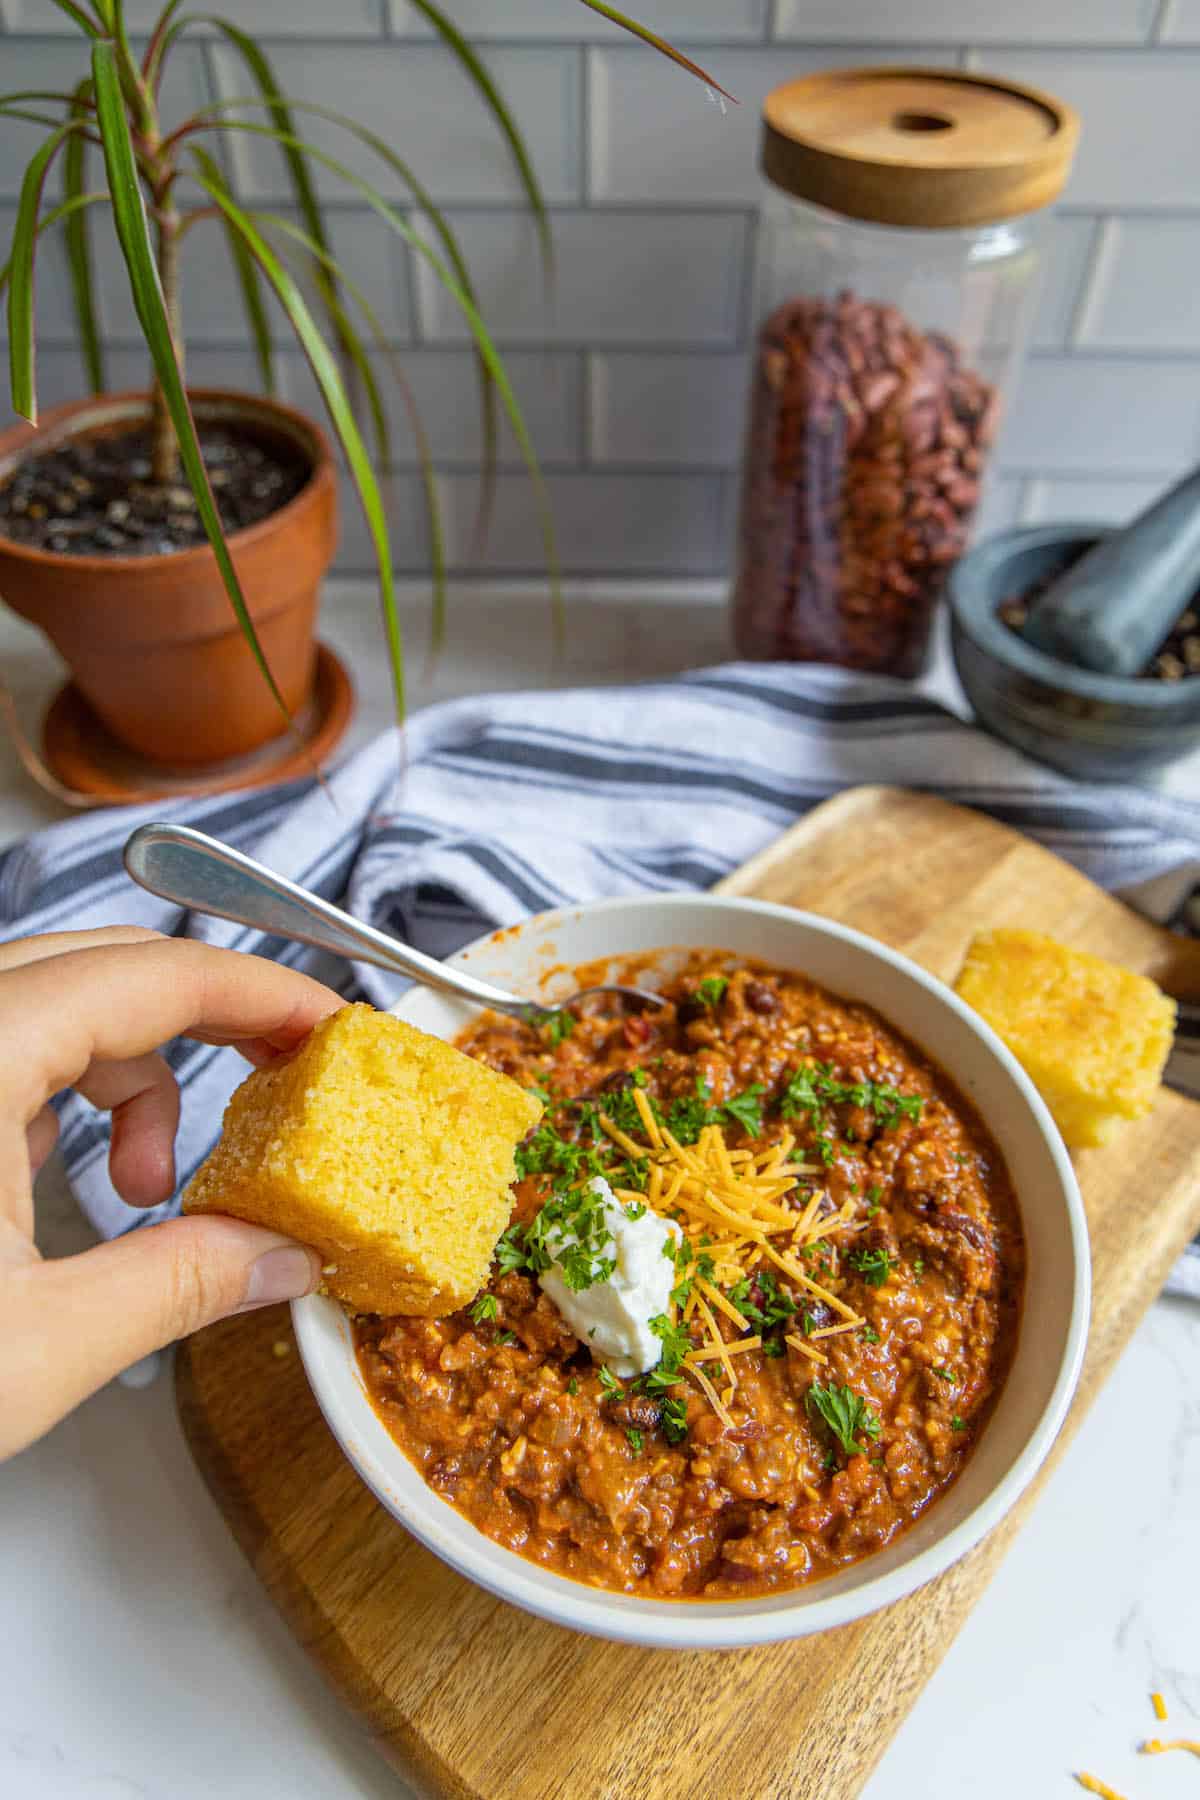 A bowl of chili with cornbread on a wooden cutting board.